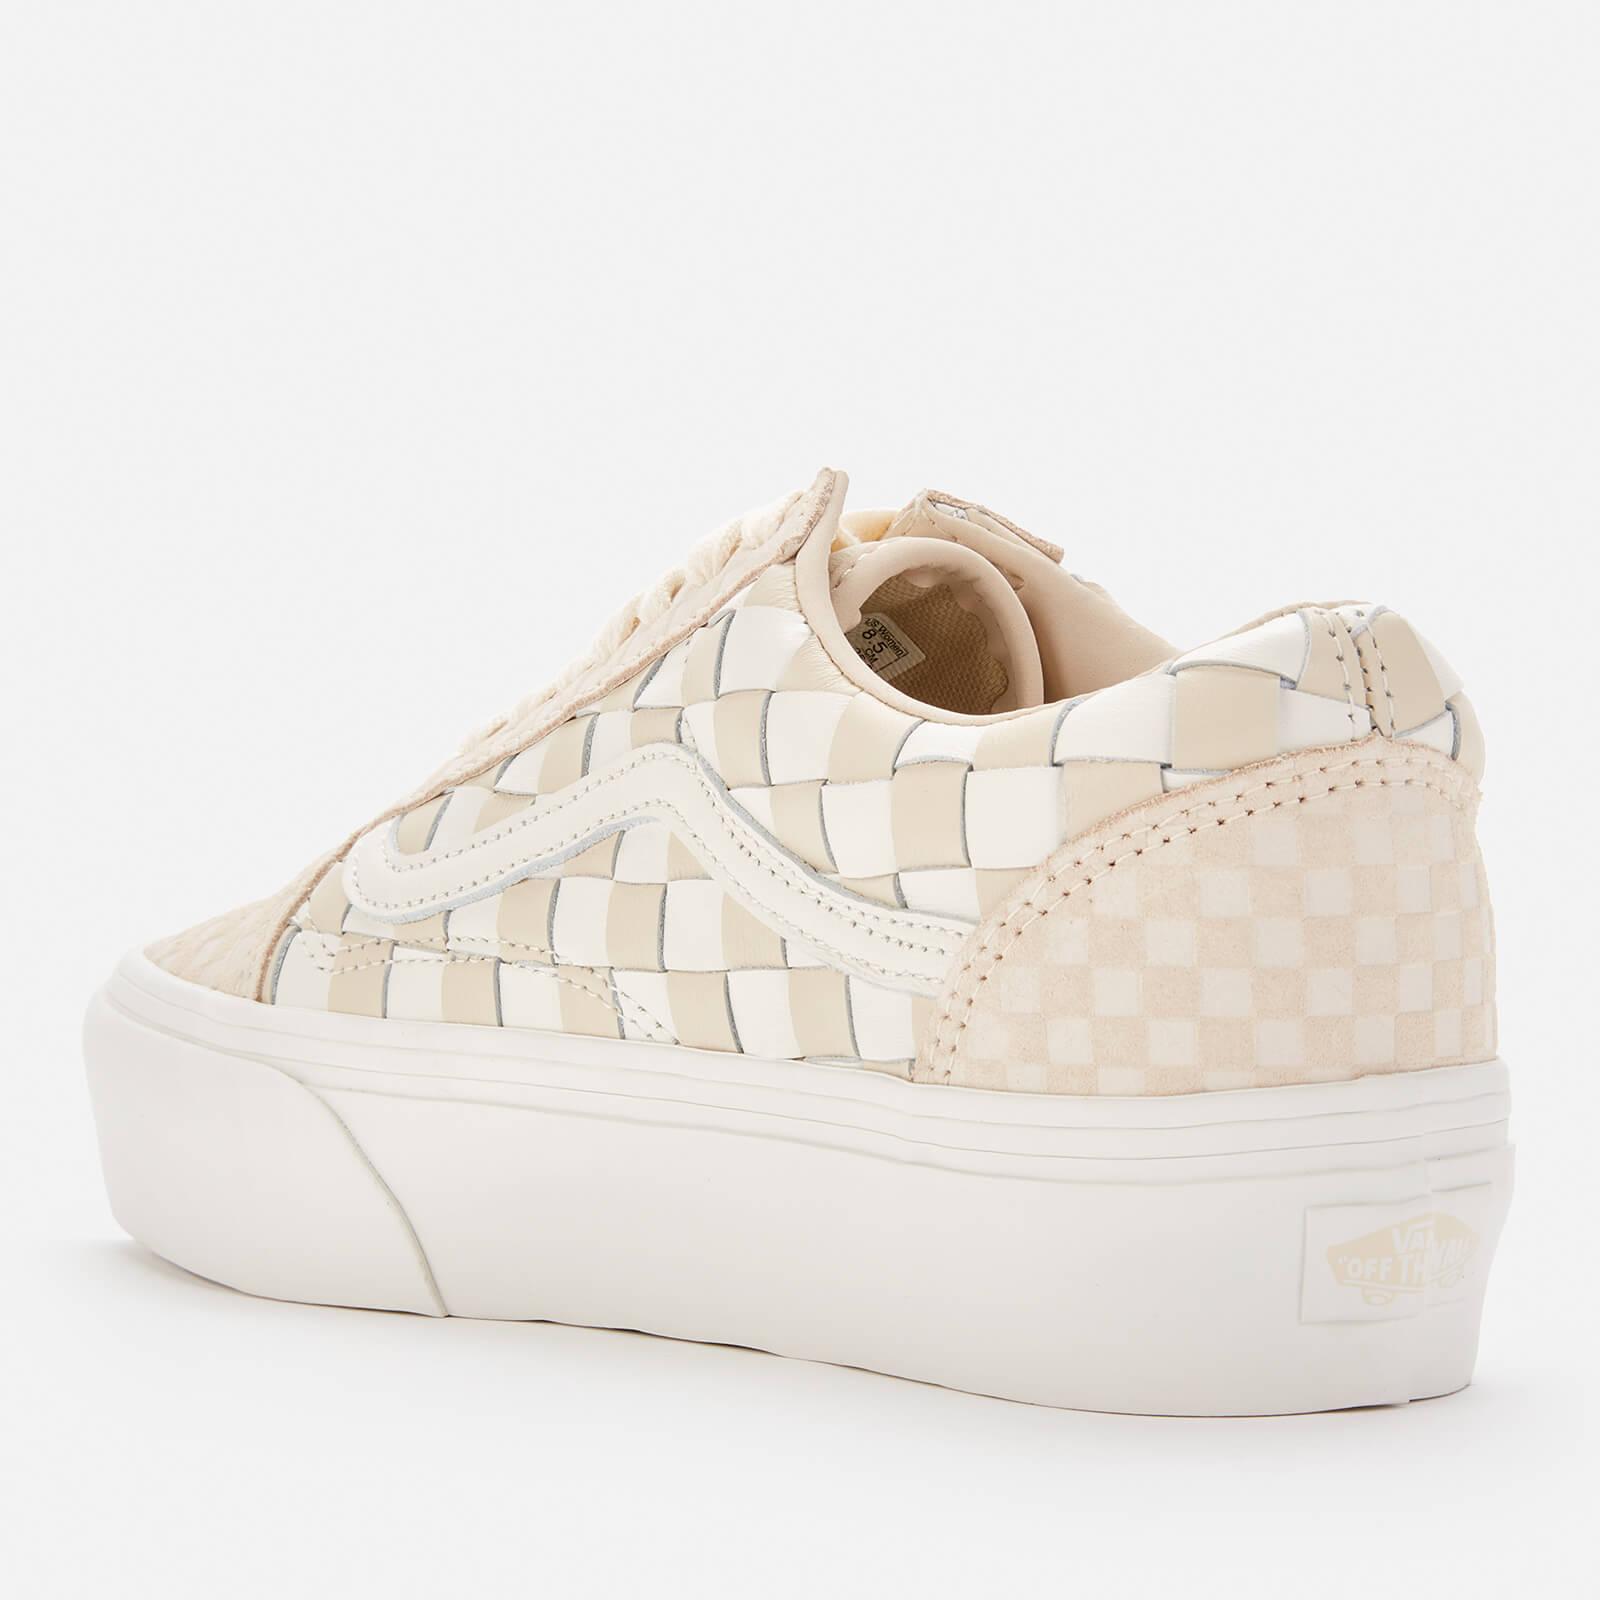 Vans Leather Woven Old Skool Platform Trainers in White | Lyst